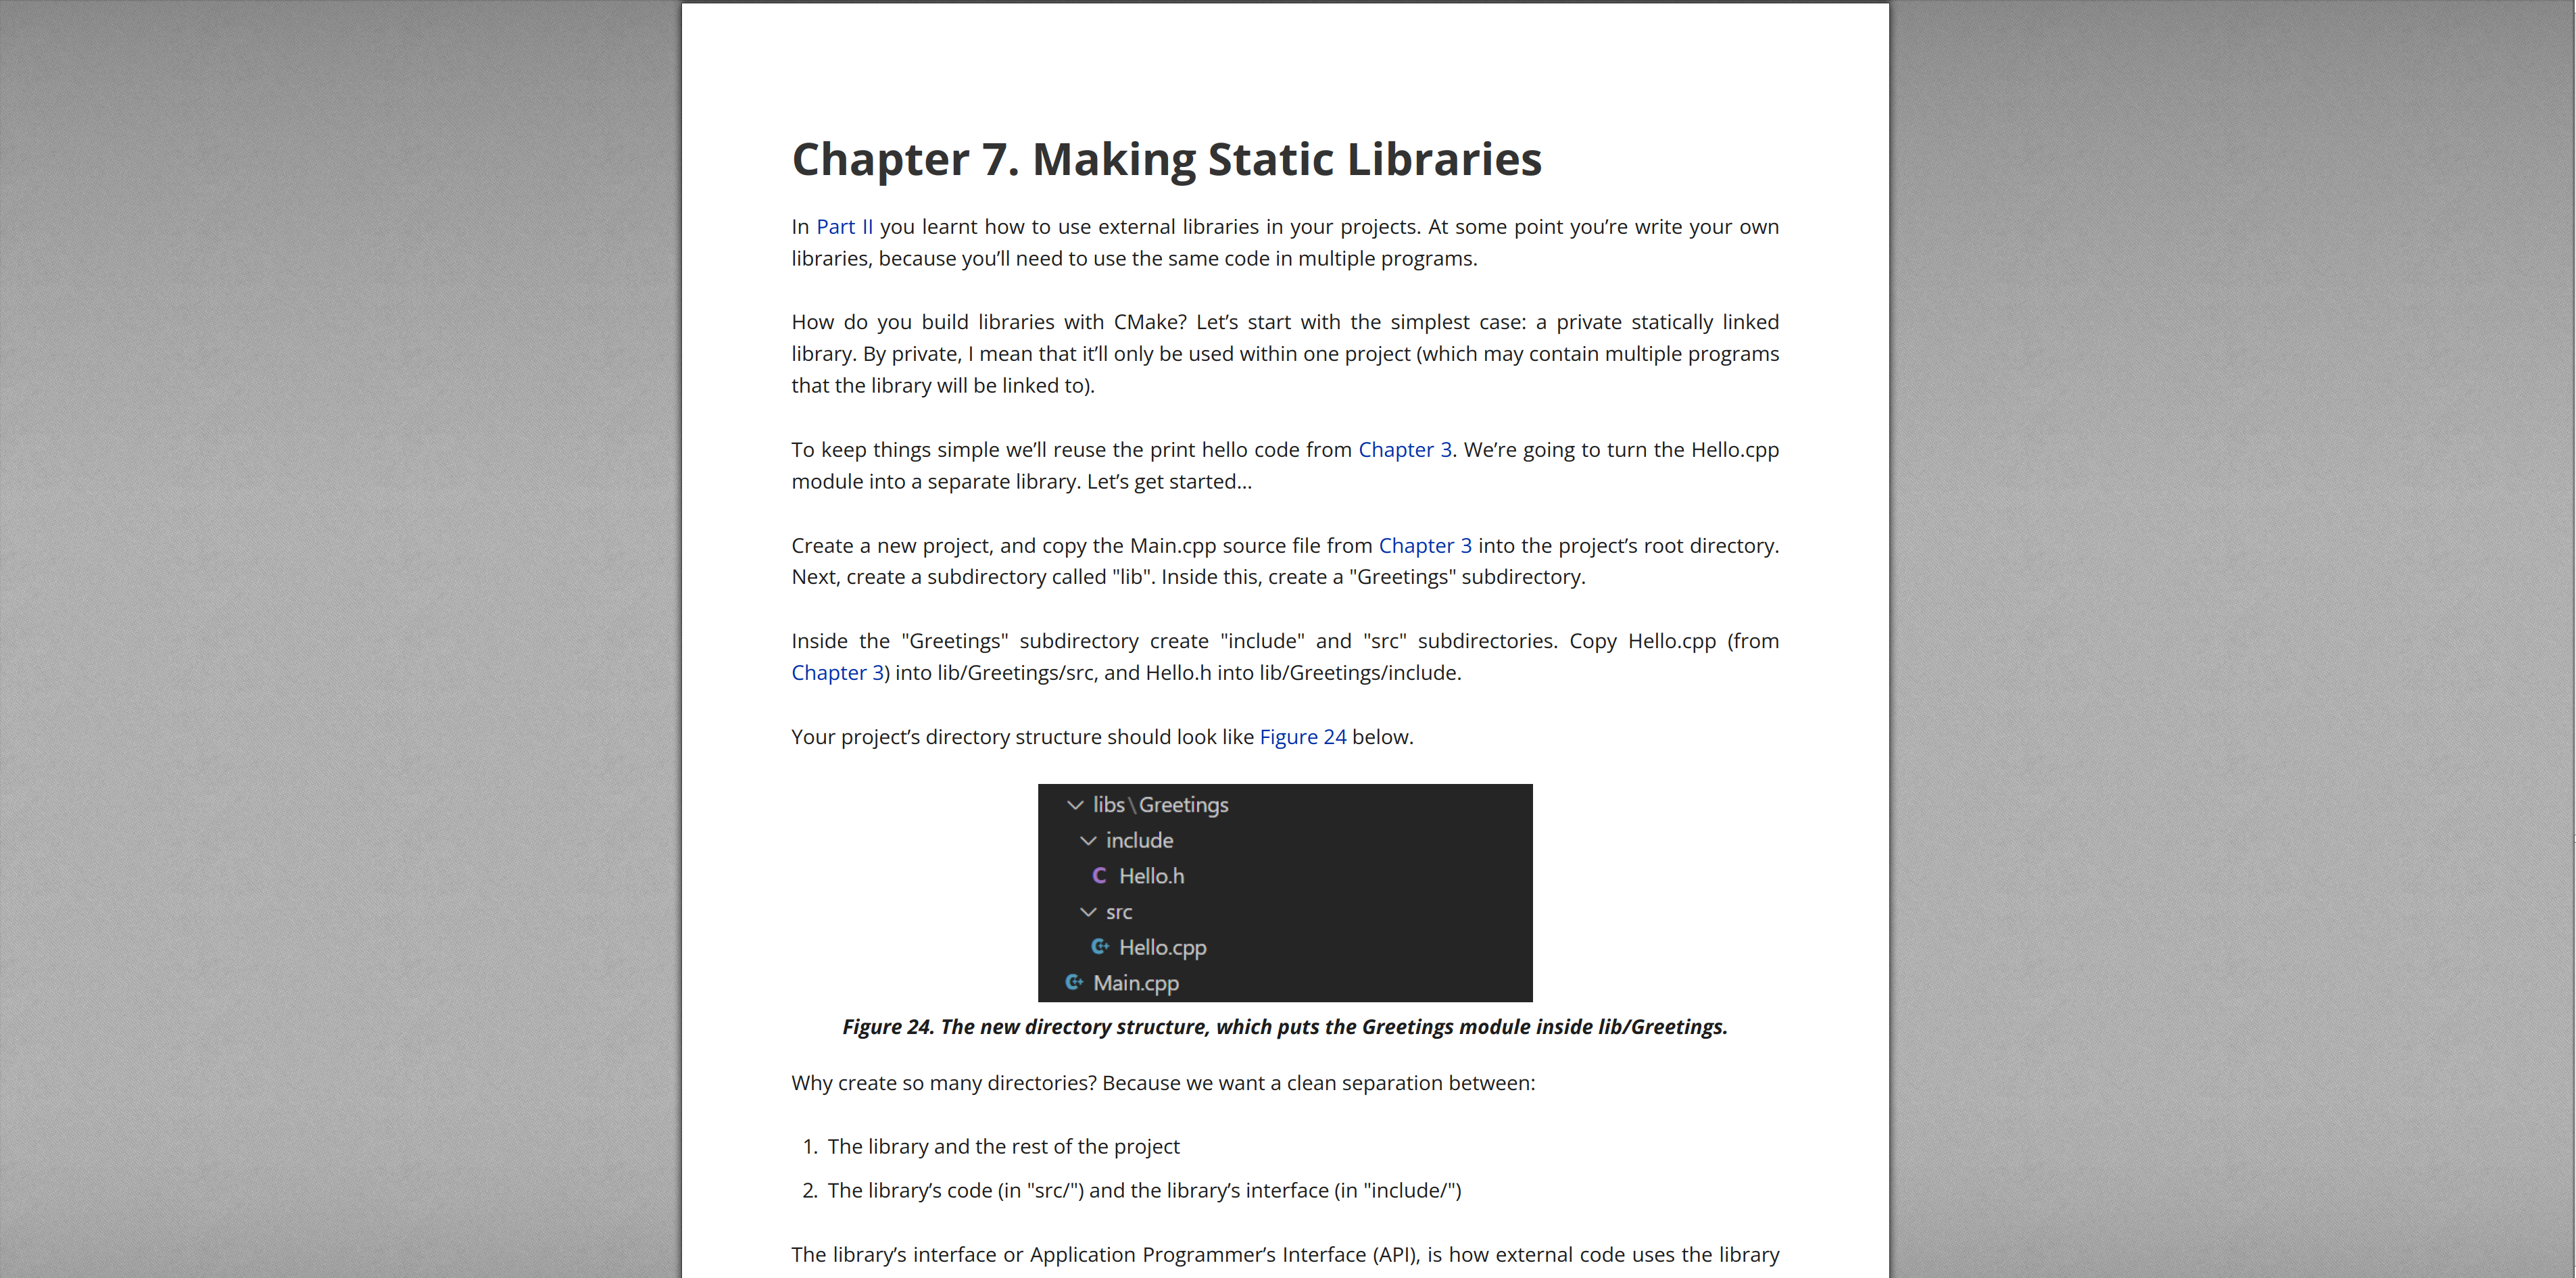 The CMake Tutorial Book Expands - Part III Done